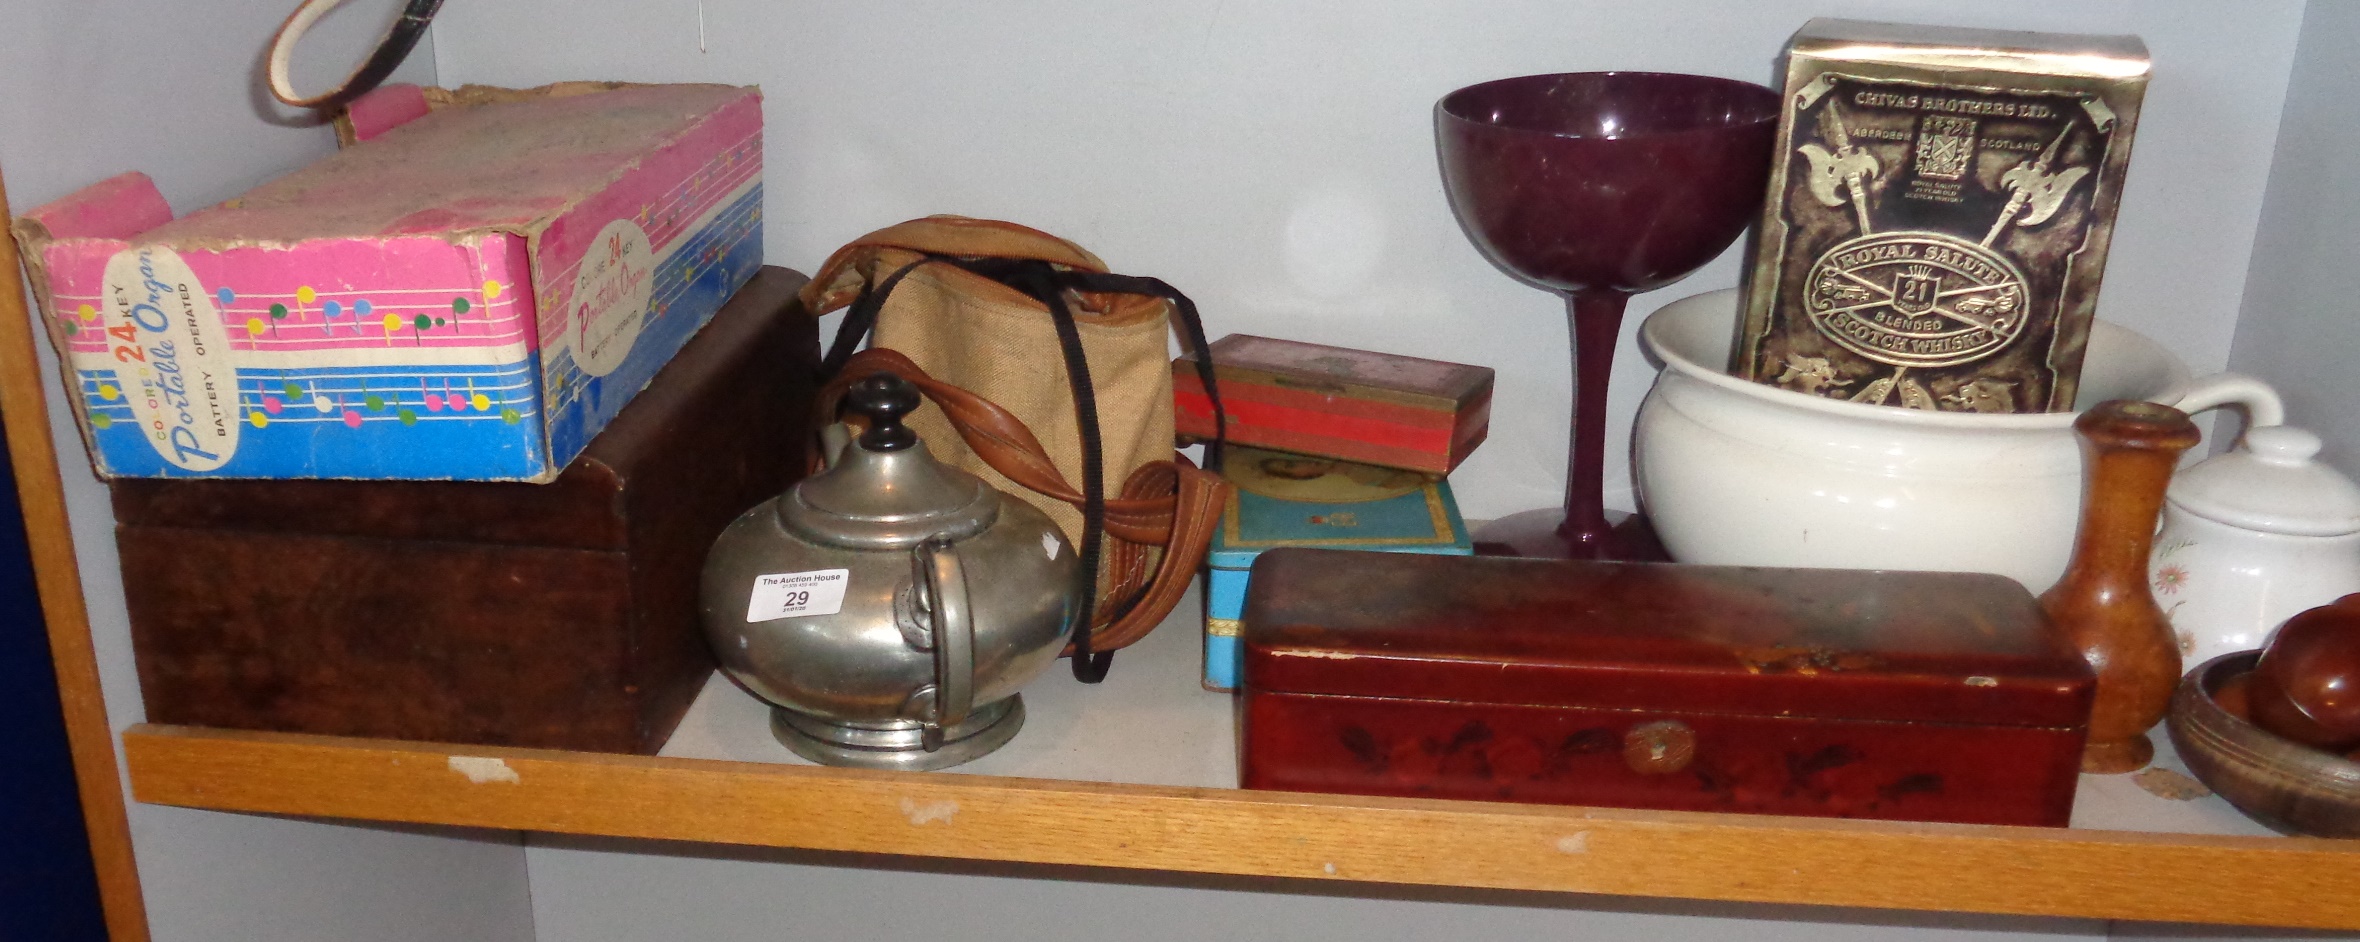 Shelf of assorted items - Image 2 of 2